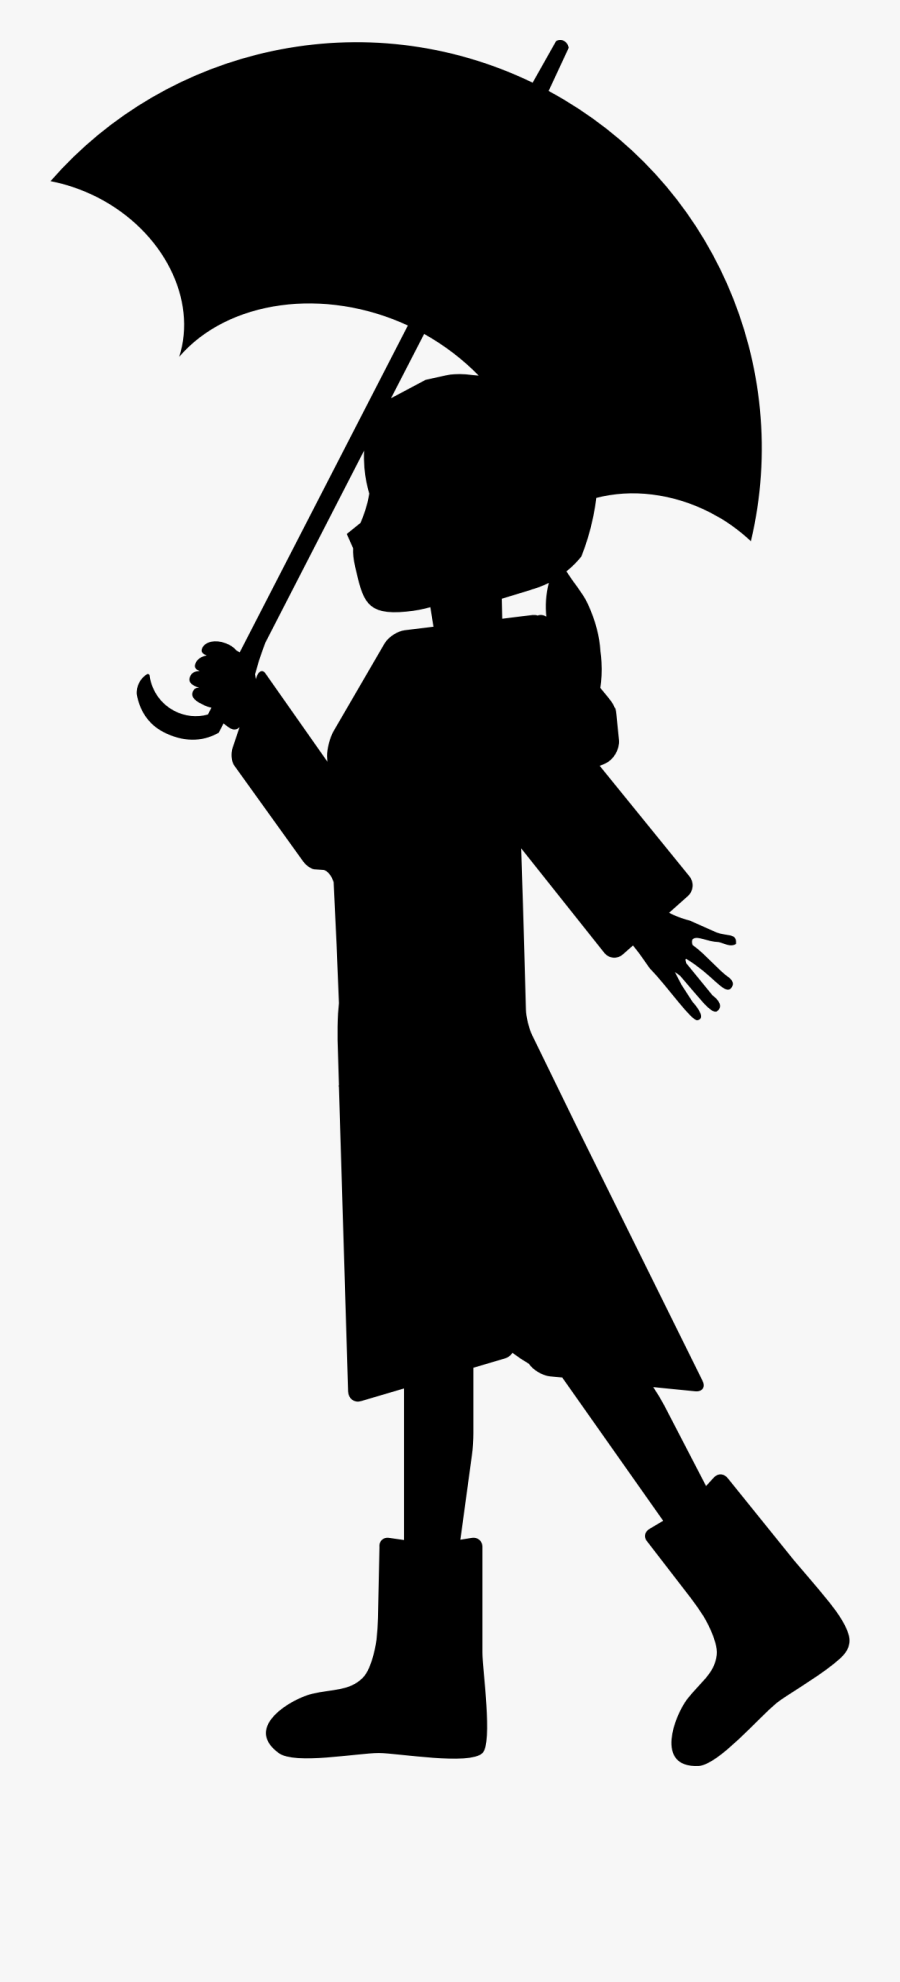 Girl With Umbrella - Silhouette Girl With Umbrella, Transparent Clipart